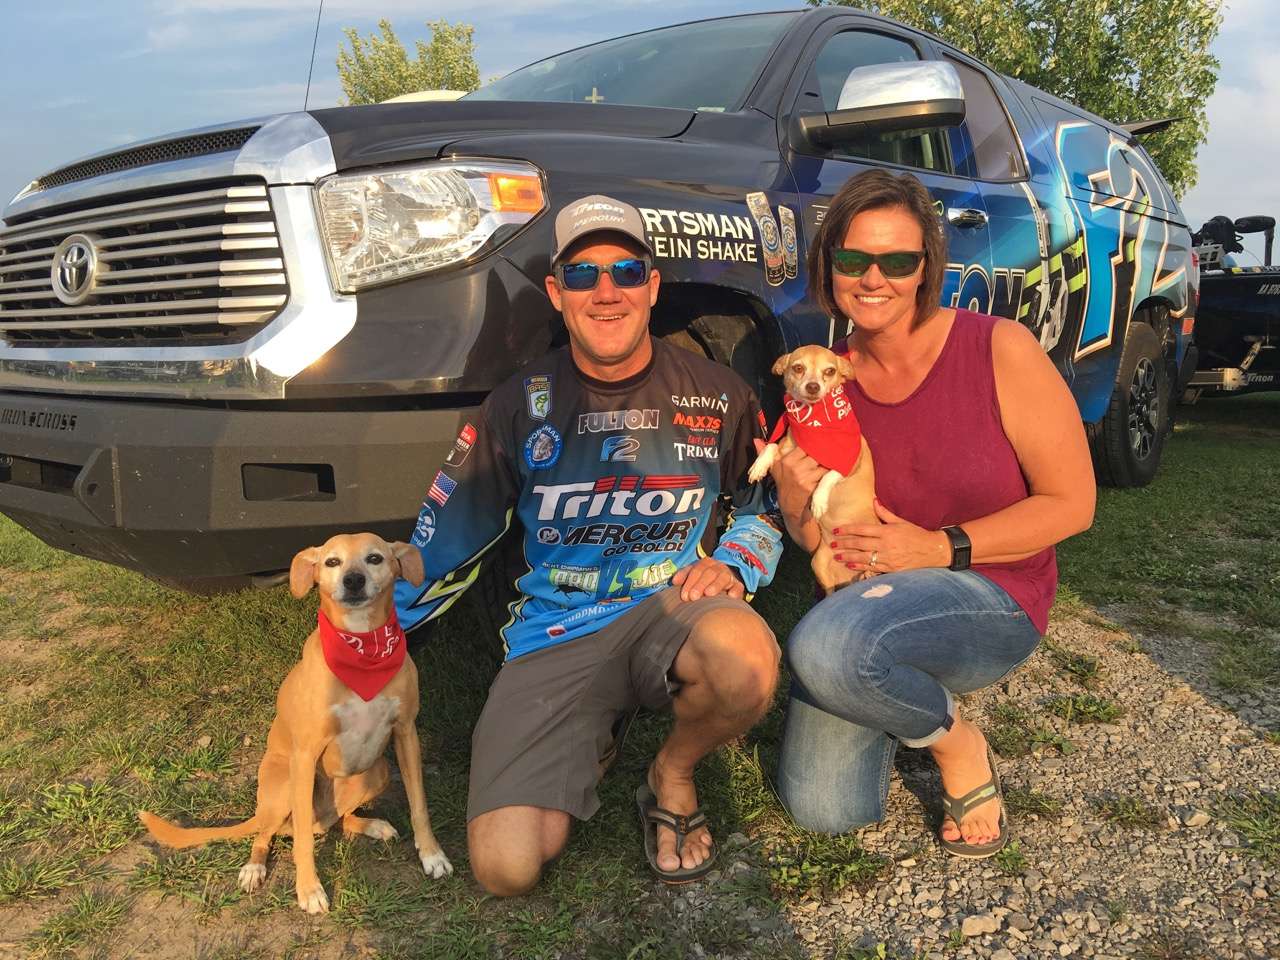 The Chapmans (Brent and Bobbi) are having a very successful season.  Theyâve towed with a Toyota for several years, including when Brent won the Toyota Bassmaster Angler of the Year title in 2012. Mitsy and Penny help lighten the mood when things get stressful amid the pro angling lifestyle. 
